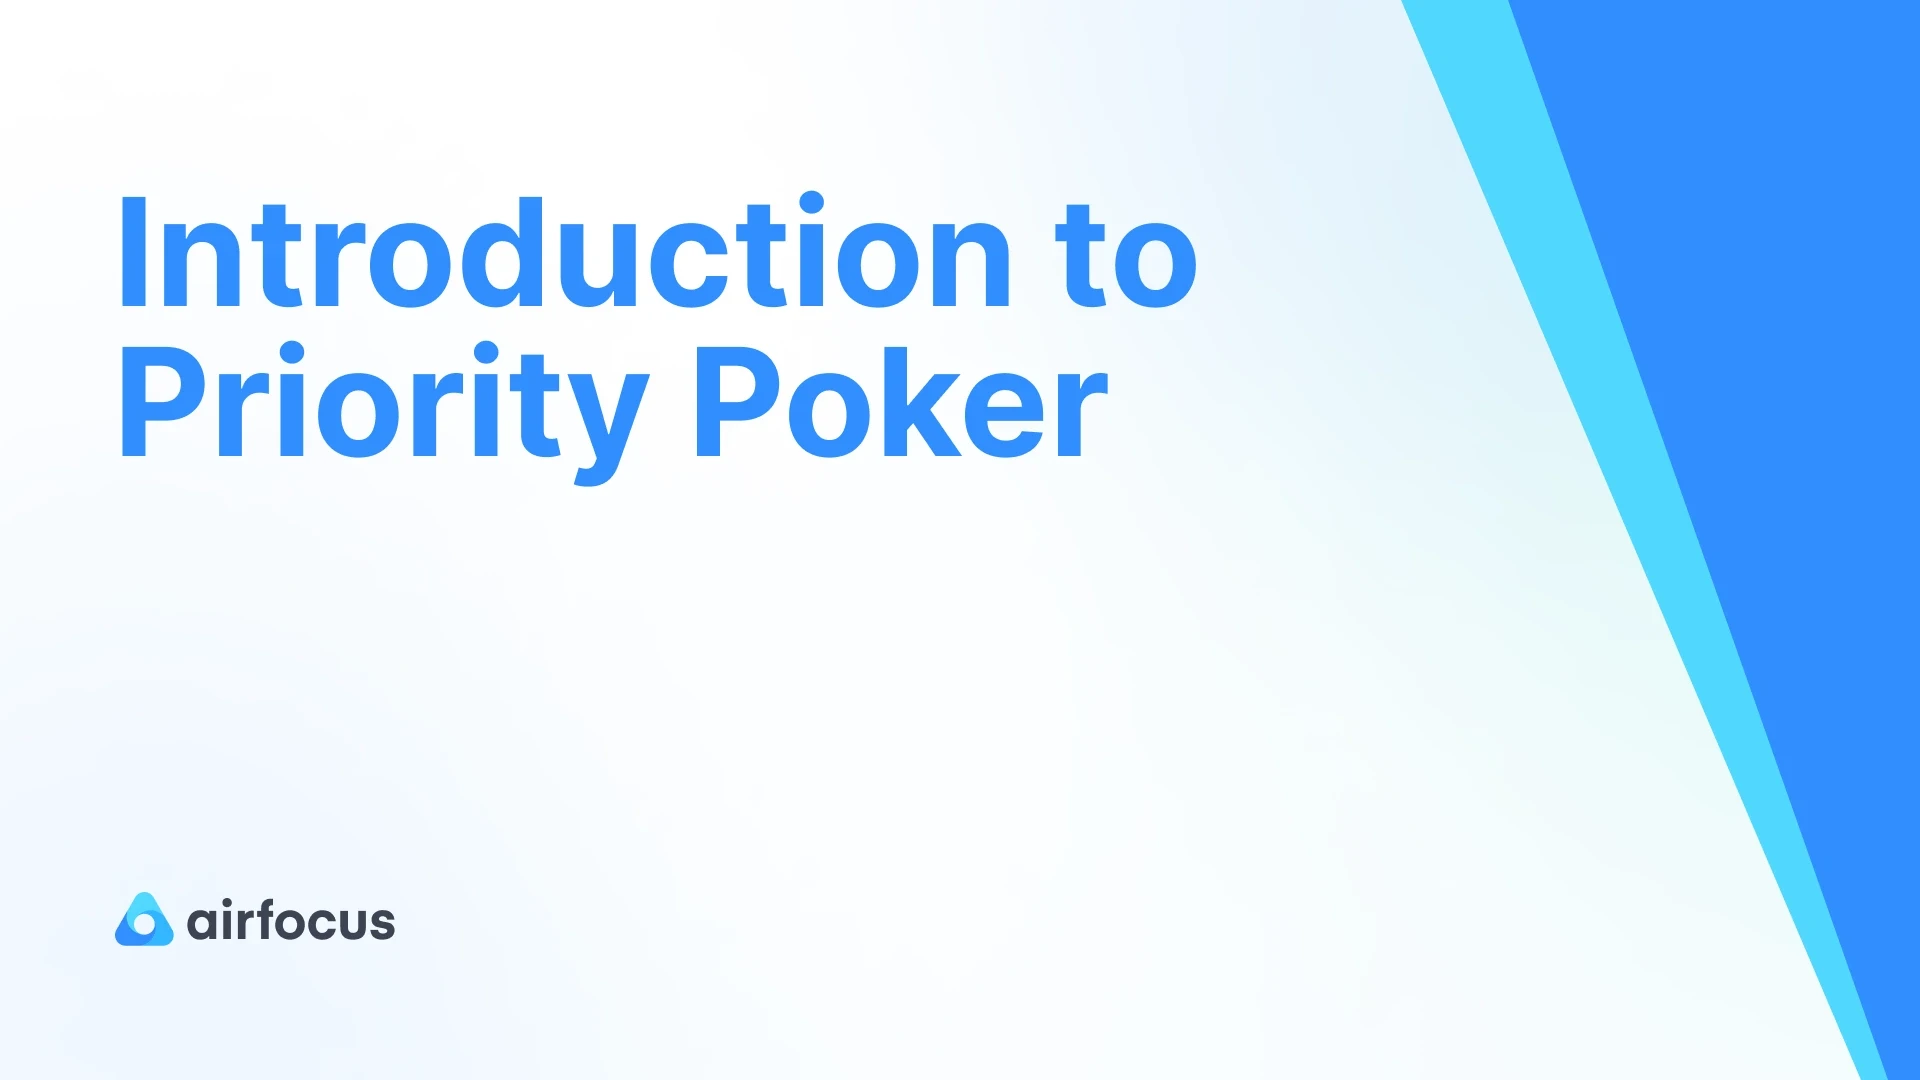 Introduction to Priority Poker